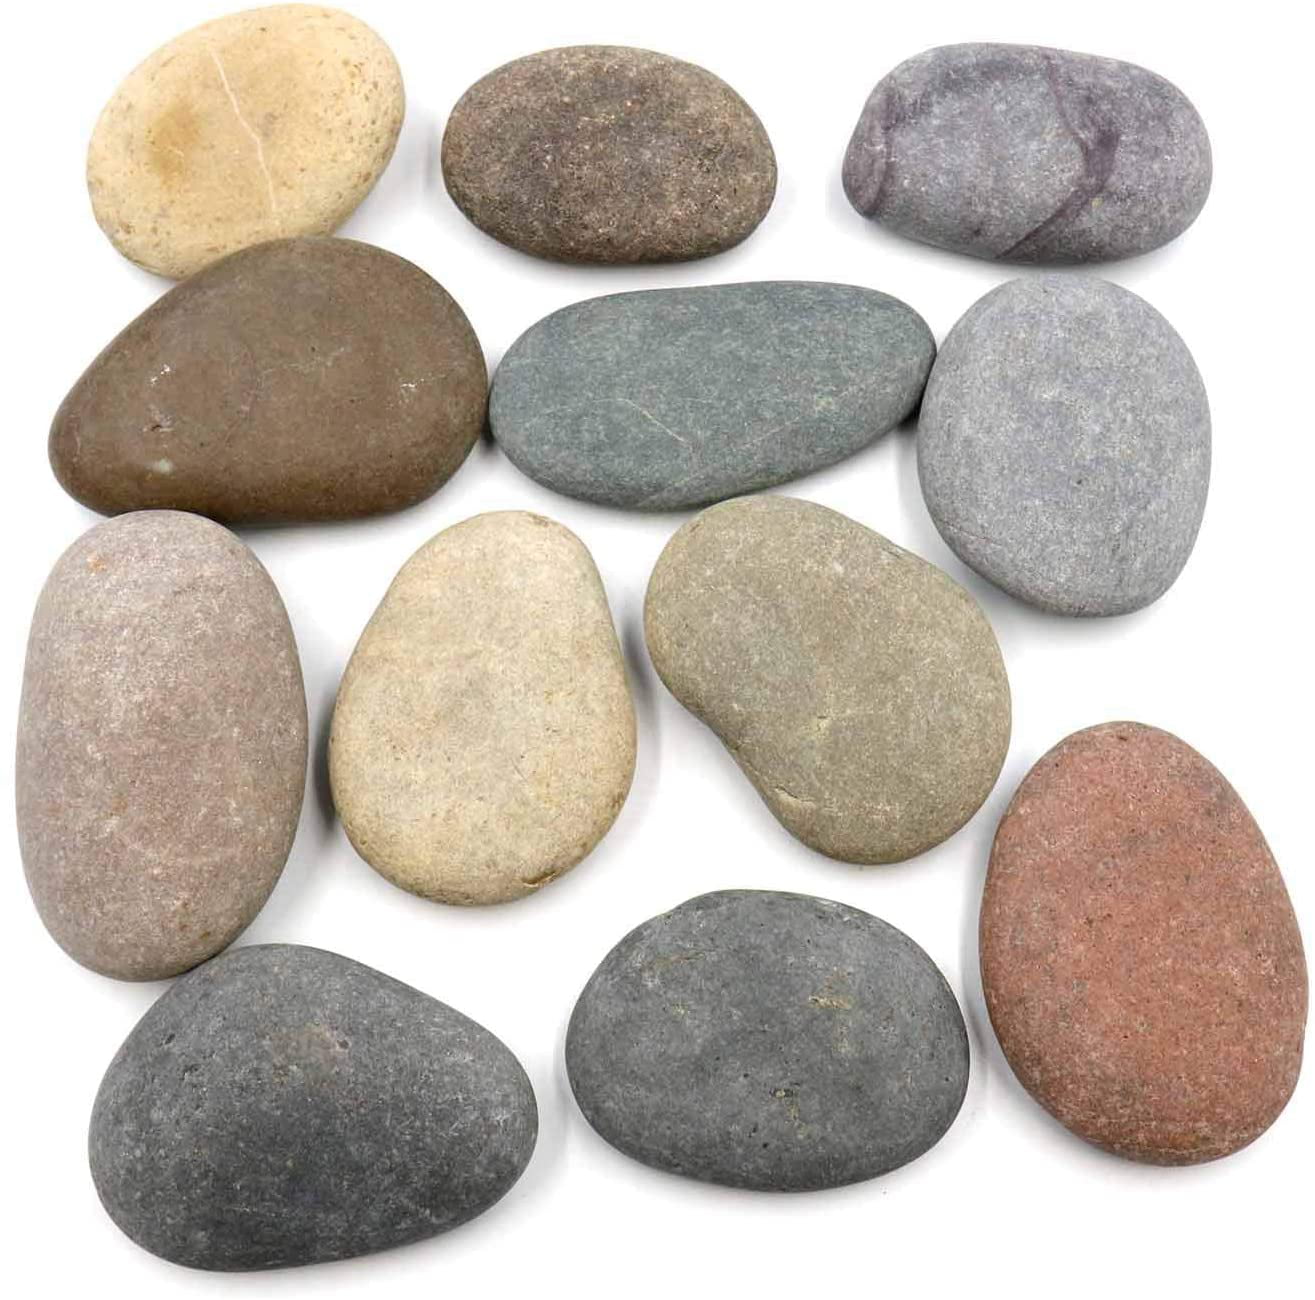 Koltose by Mash - Craft Rocks for Painting, 100% Natural White Stones,  2”-3.5” inch, Set of 20 